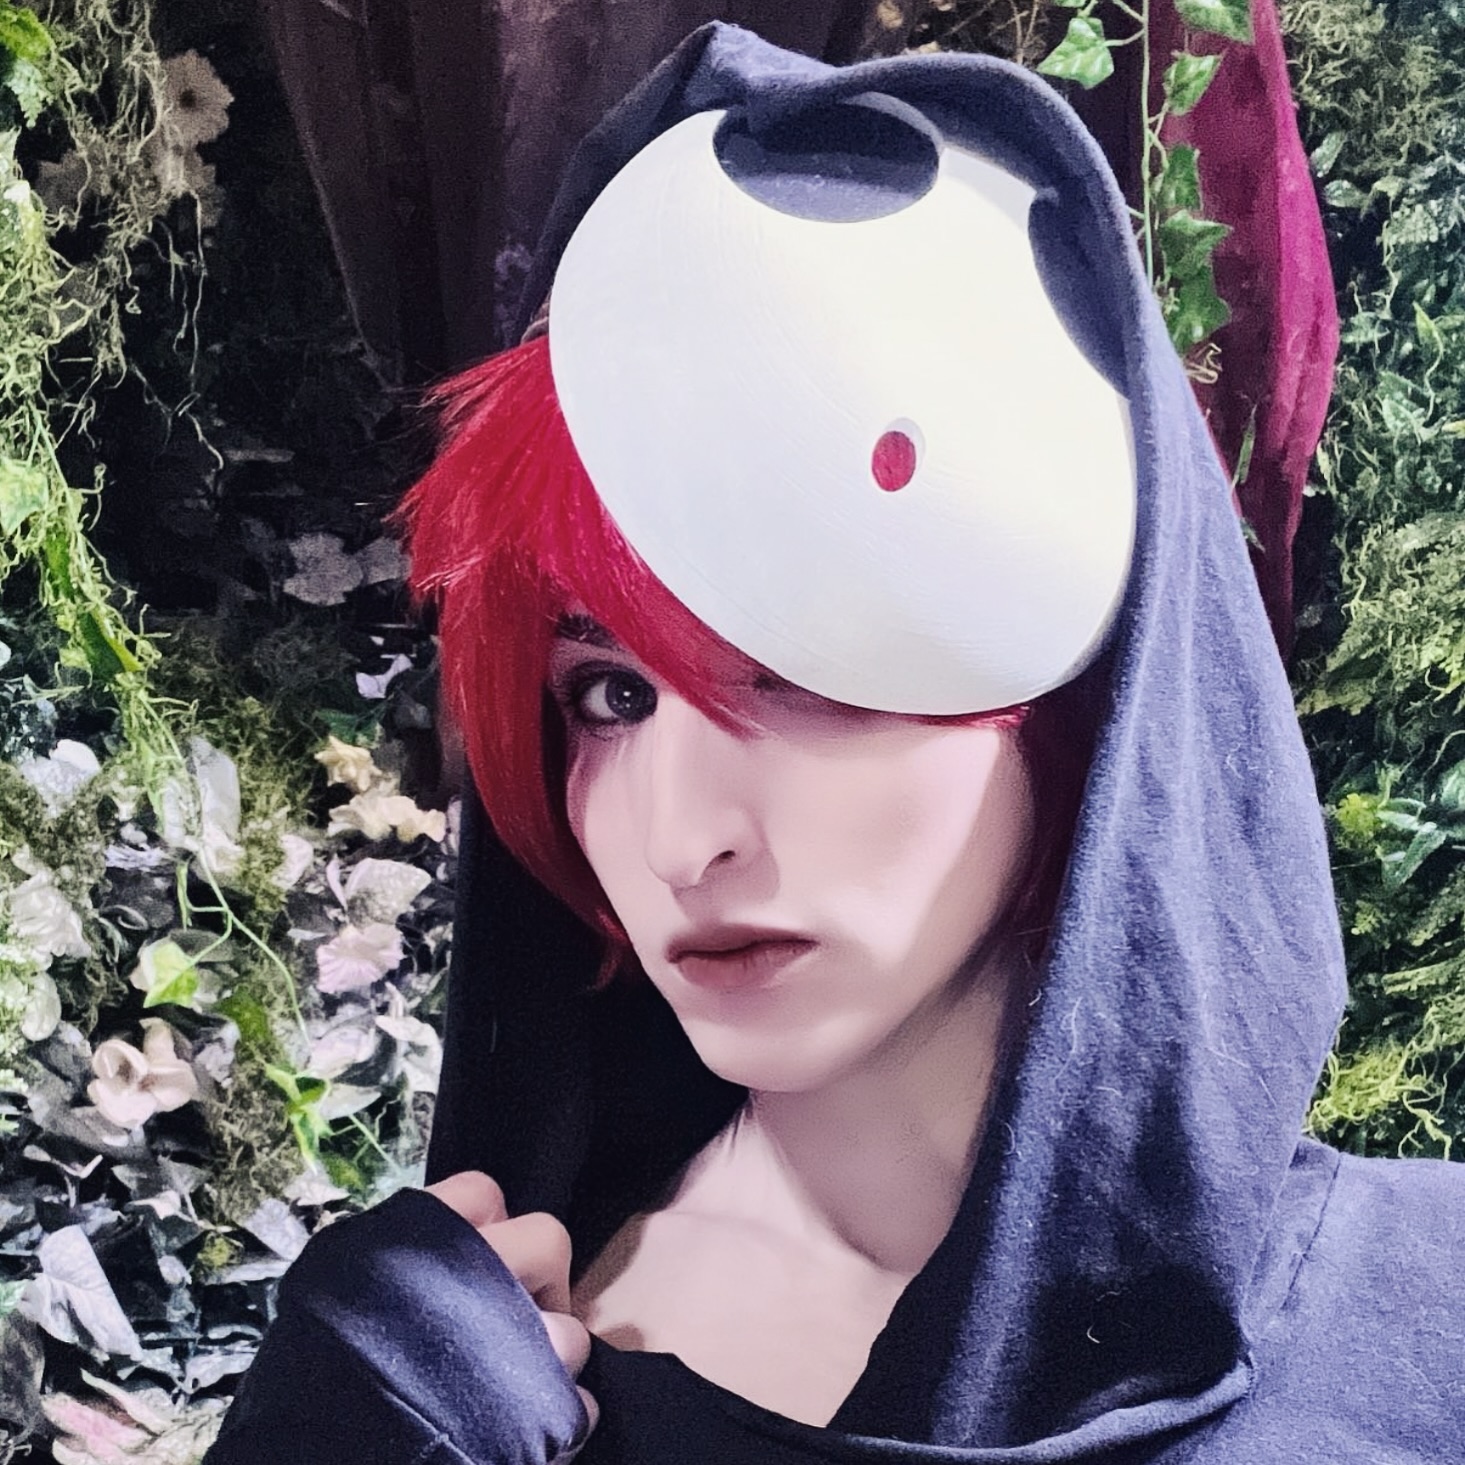 Everyone is always curious to know, what is under a shyguys mask? Honestly it’s just some average shmuck. But show them some love anyway. #shyguy #shyguycosplay #mariobros #cosplay #handsome #cute #femboi